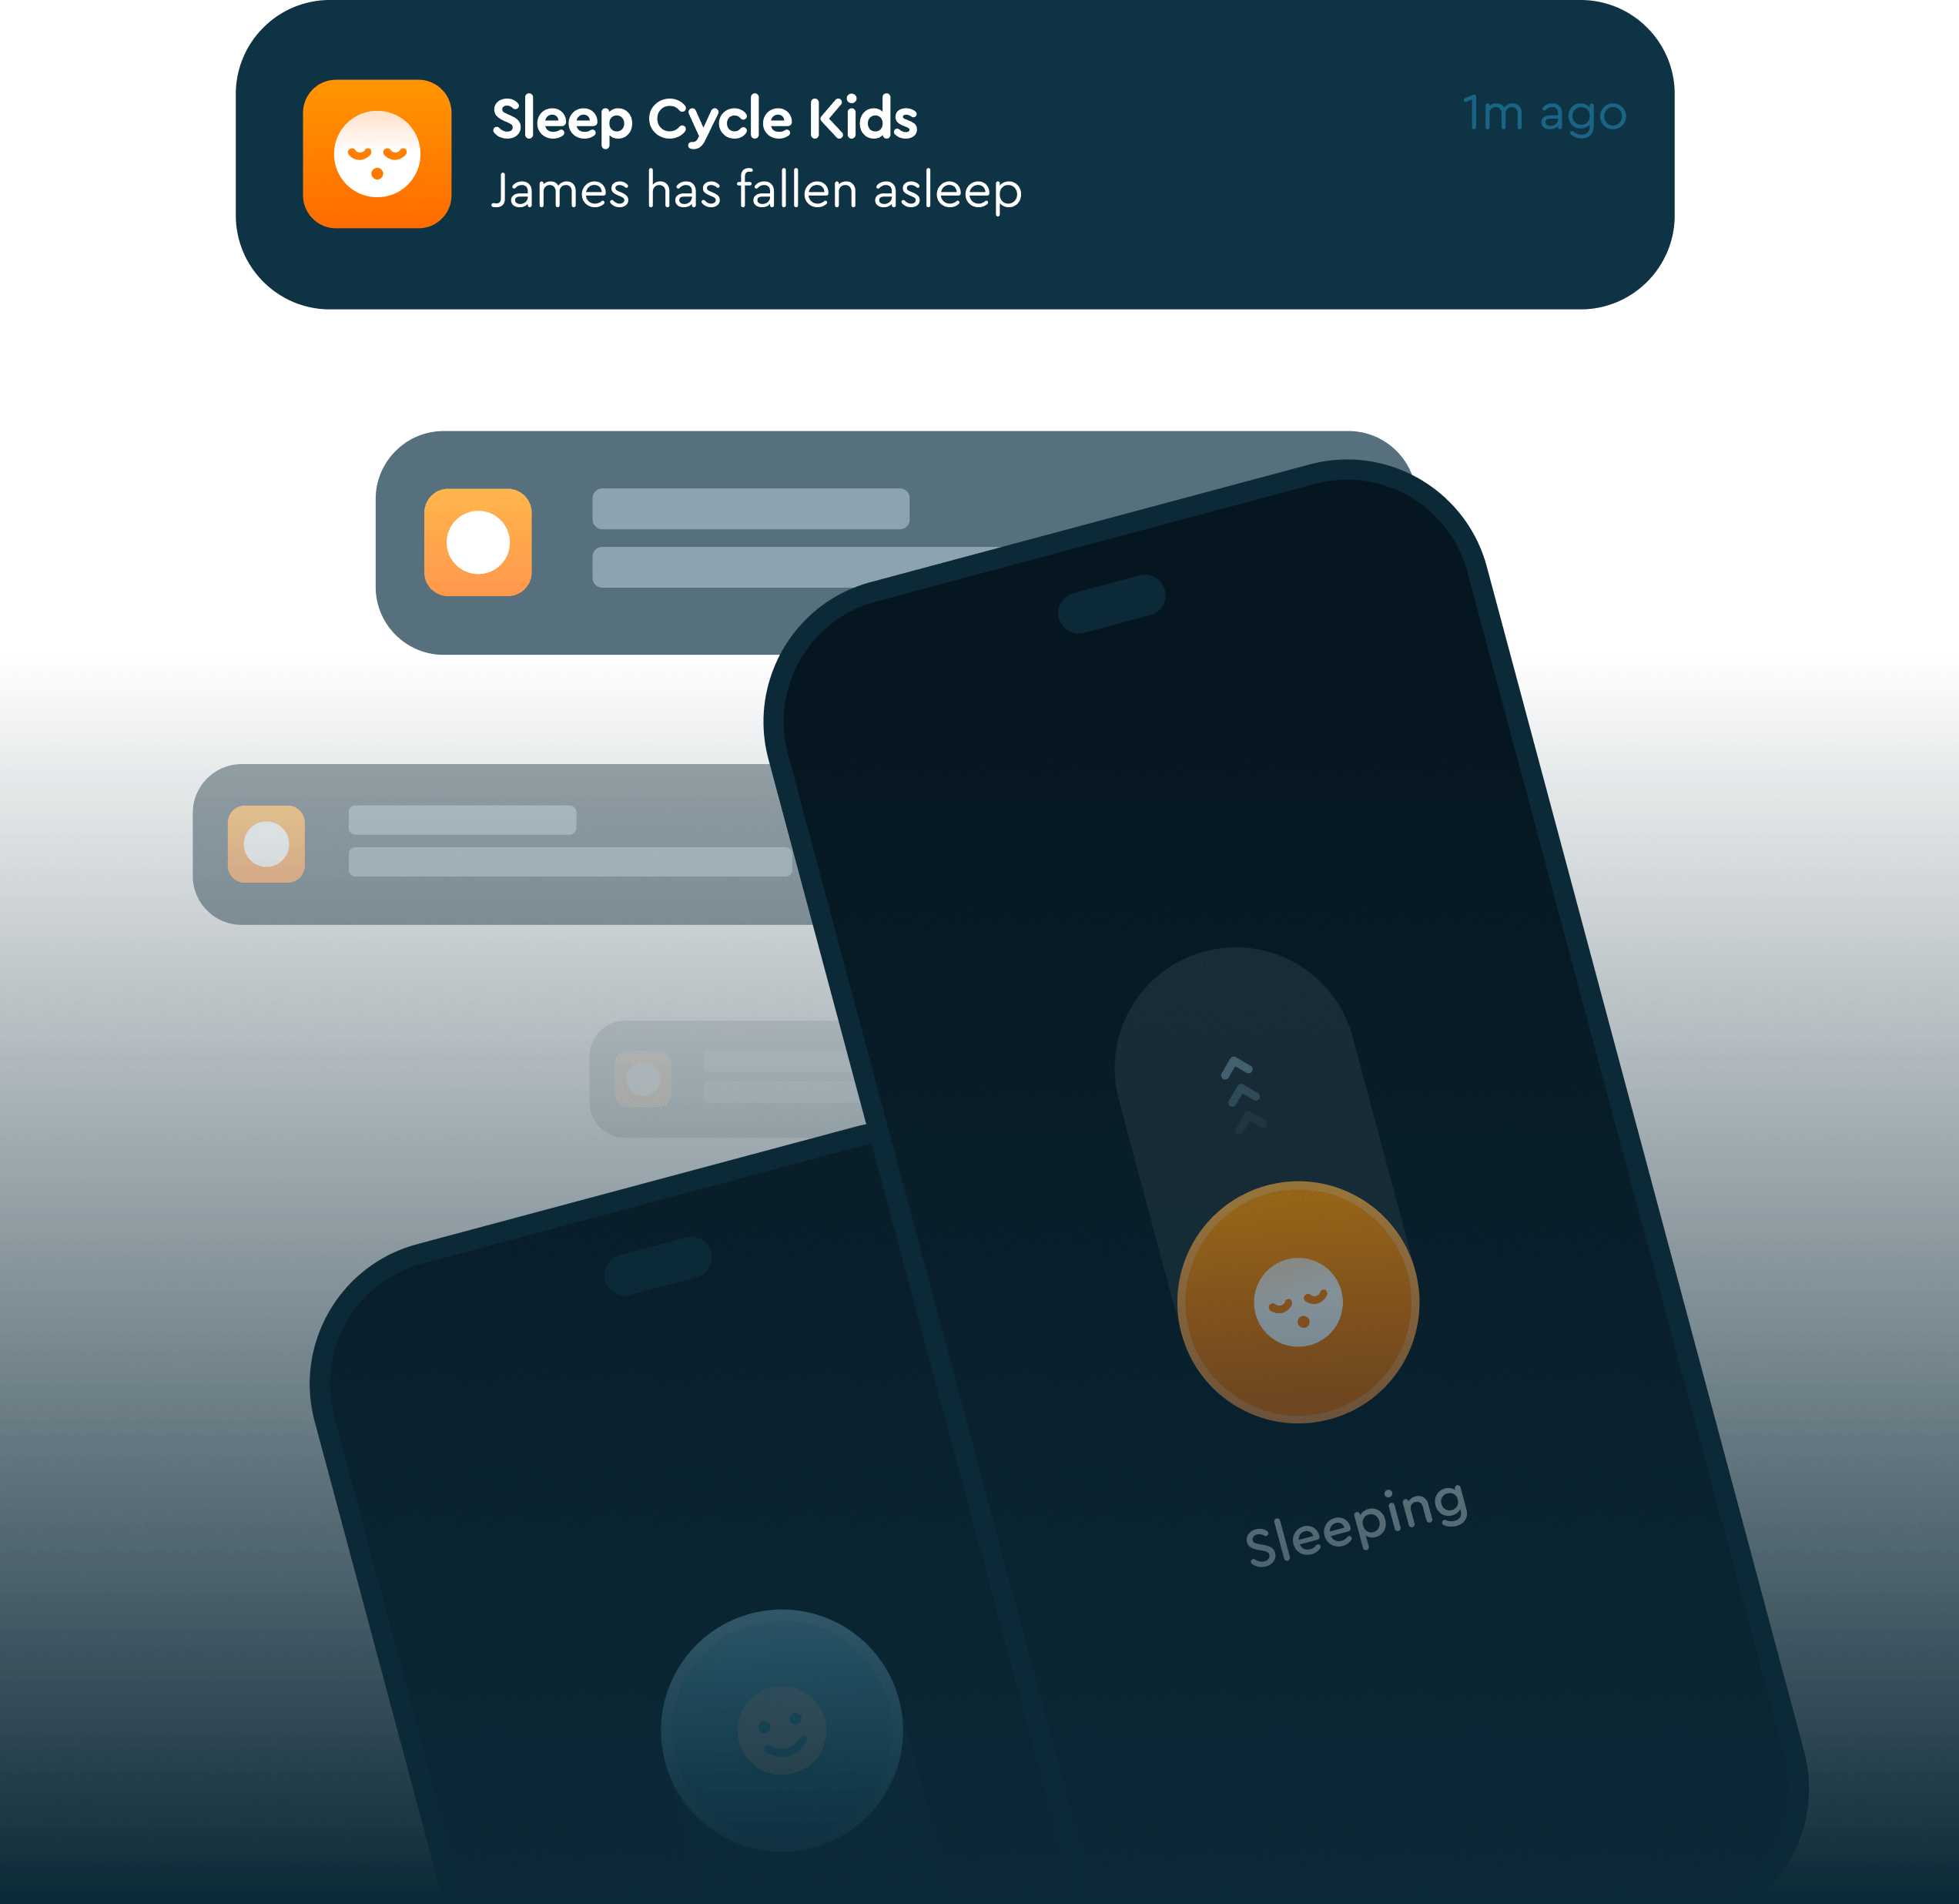 mockup of phone getting notifications from application